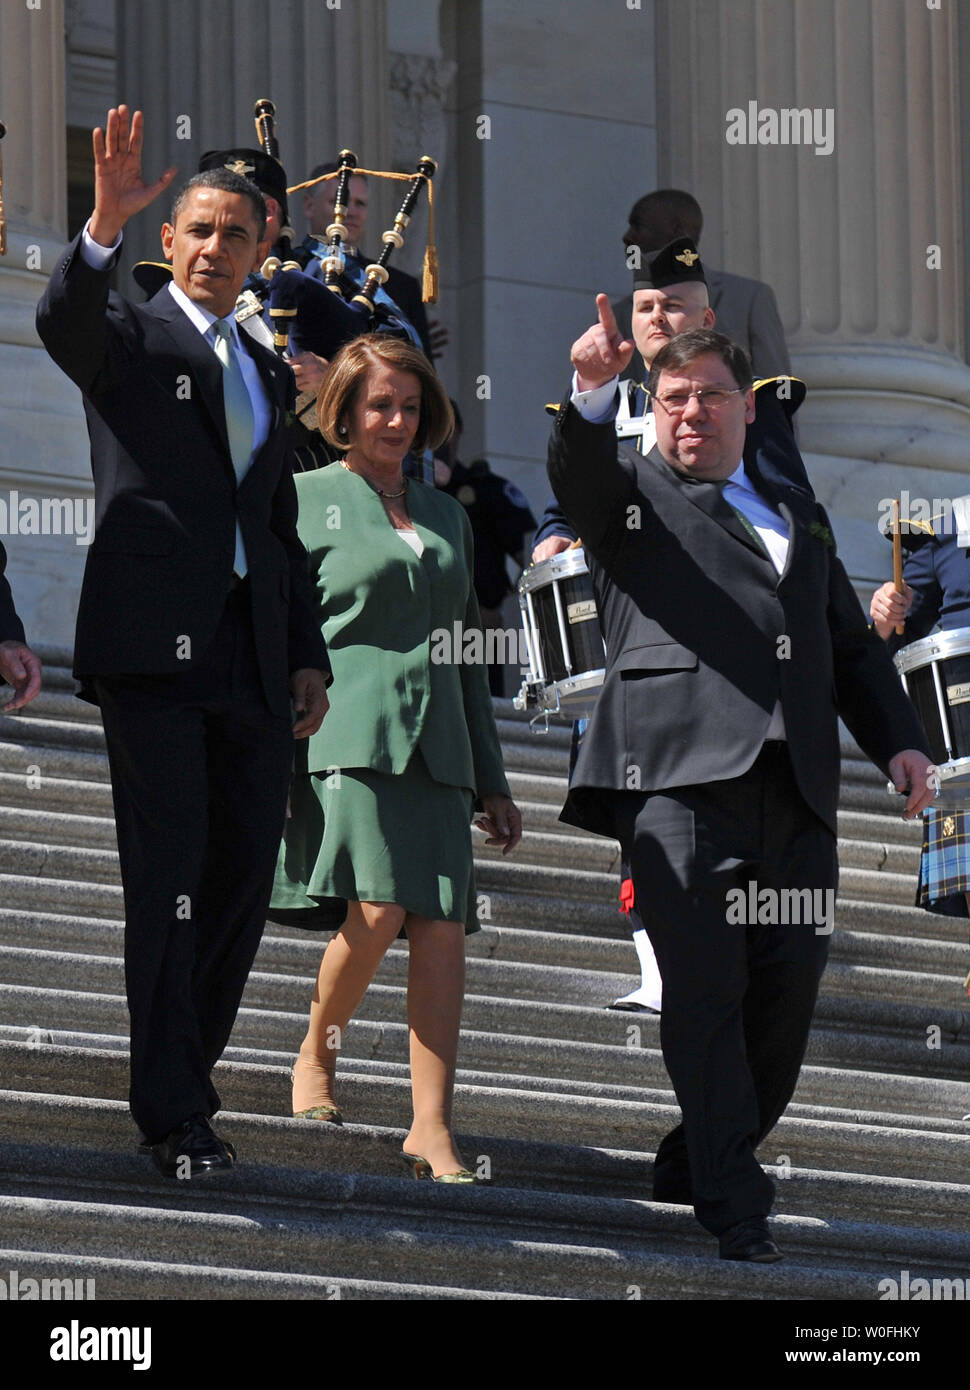 U.S. President Barack Obama (L), Irish Prime Minister Brian Cowen (R) and Speaker of the House Nancy Pelosi (D-CA) leave the U.S. Capitol Building after a St. Patrick's Day Luncheon, in Washington on March 17, 2010.  UPI/Kevin Dietsch Stock Photo